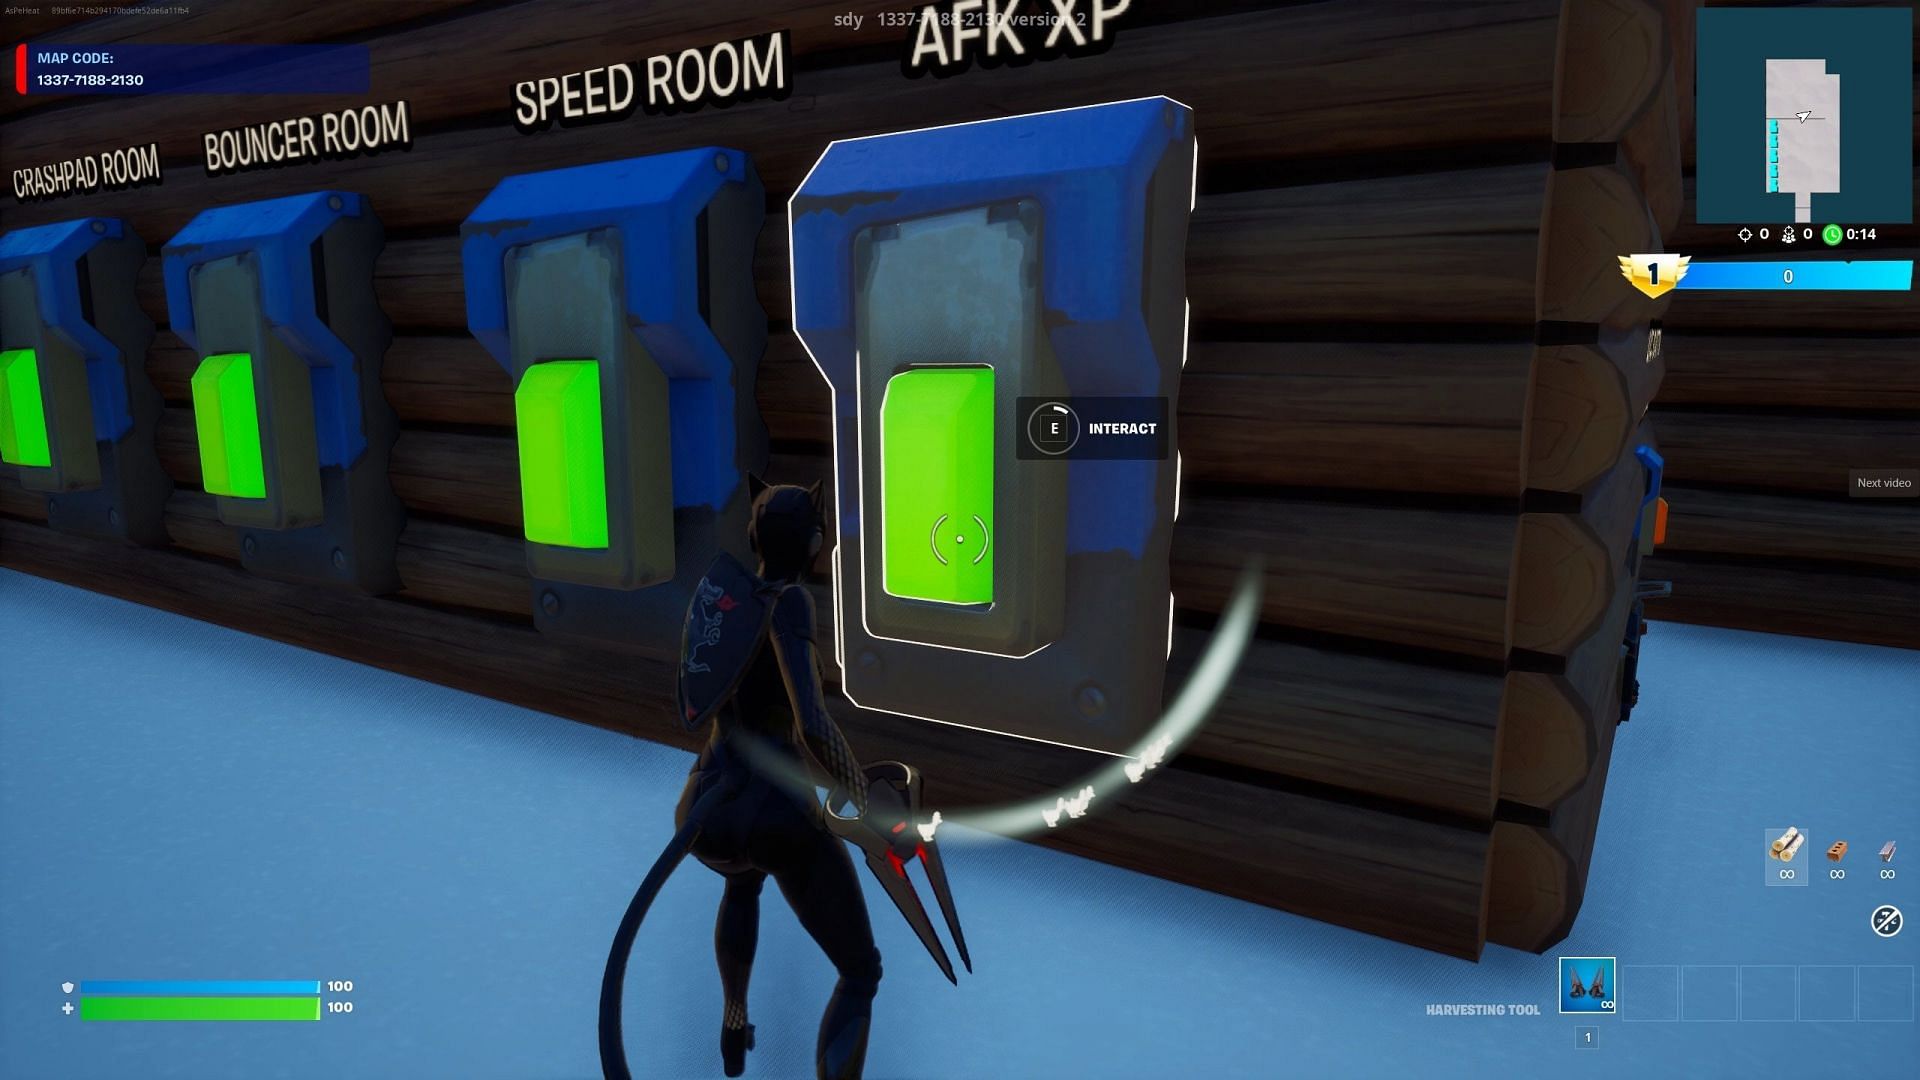 To start getting levels from the new Fortnite XP map, interact with the AFK XP button (Image via Epic Games)